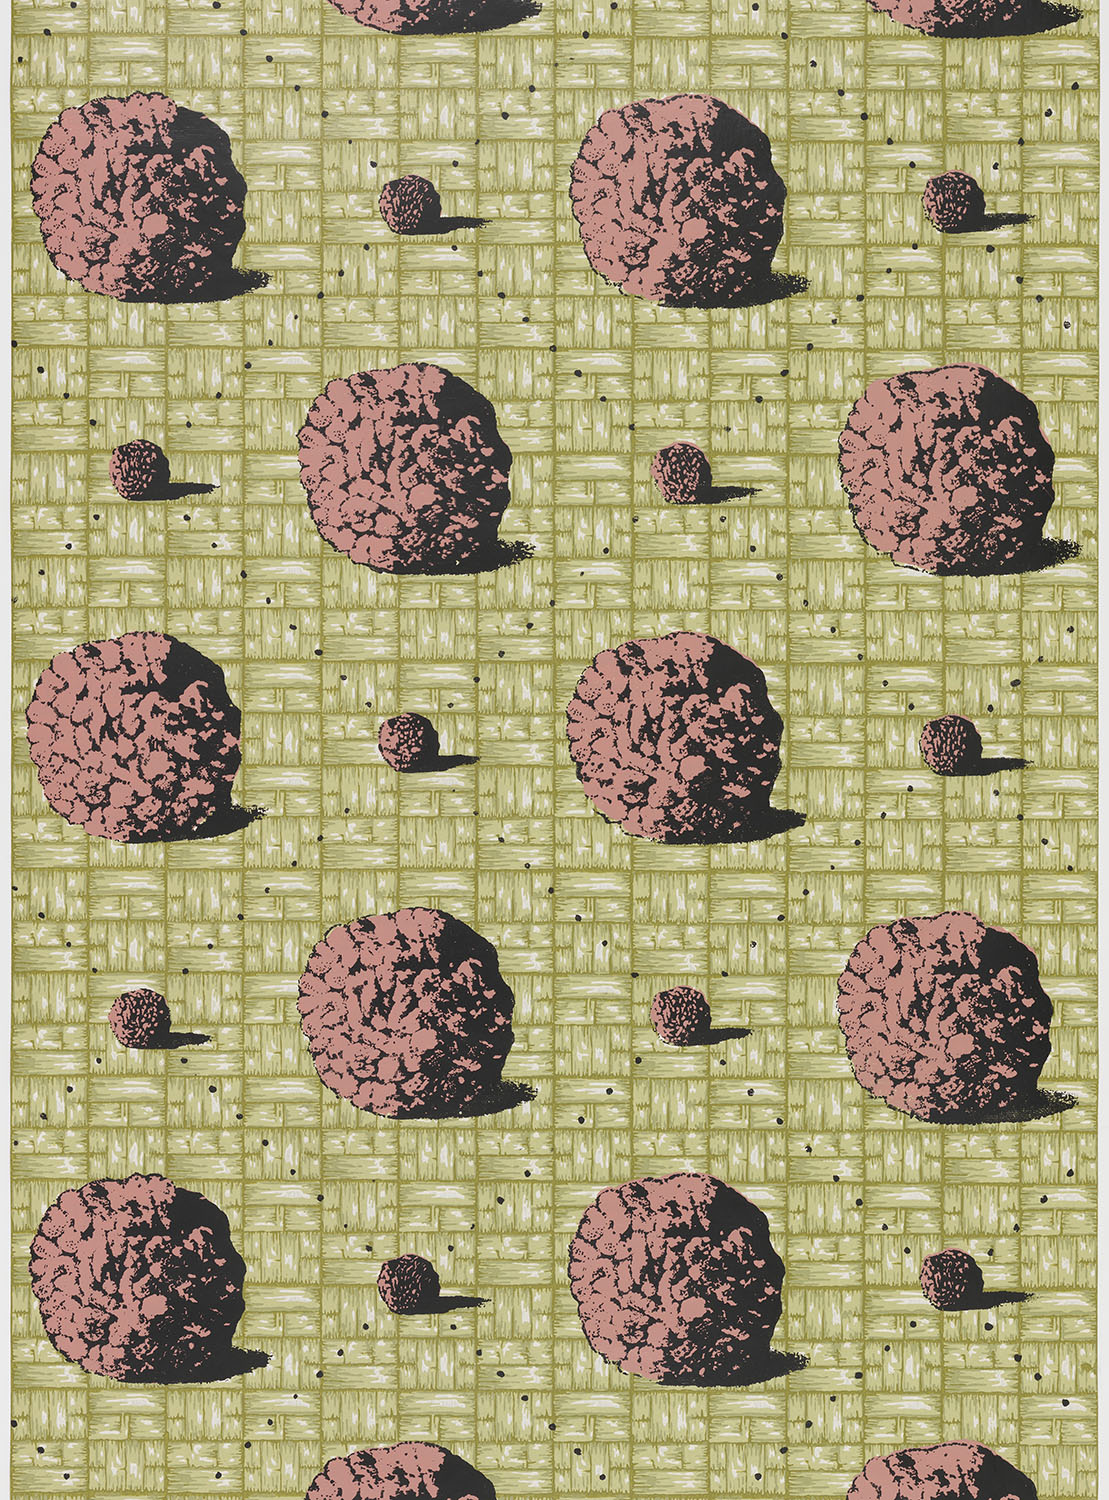 Picture of a Poster of Meatballs